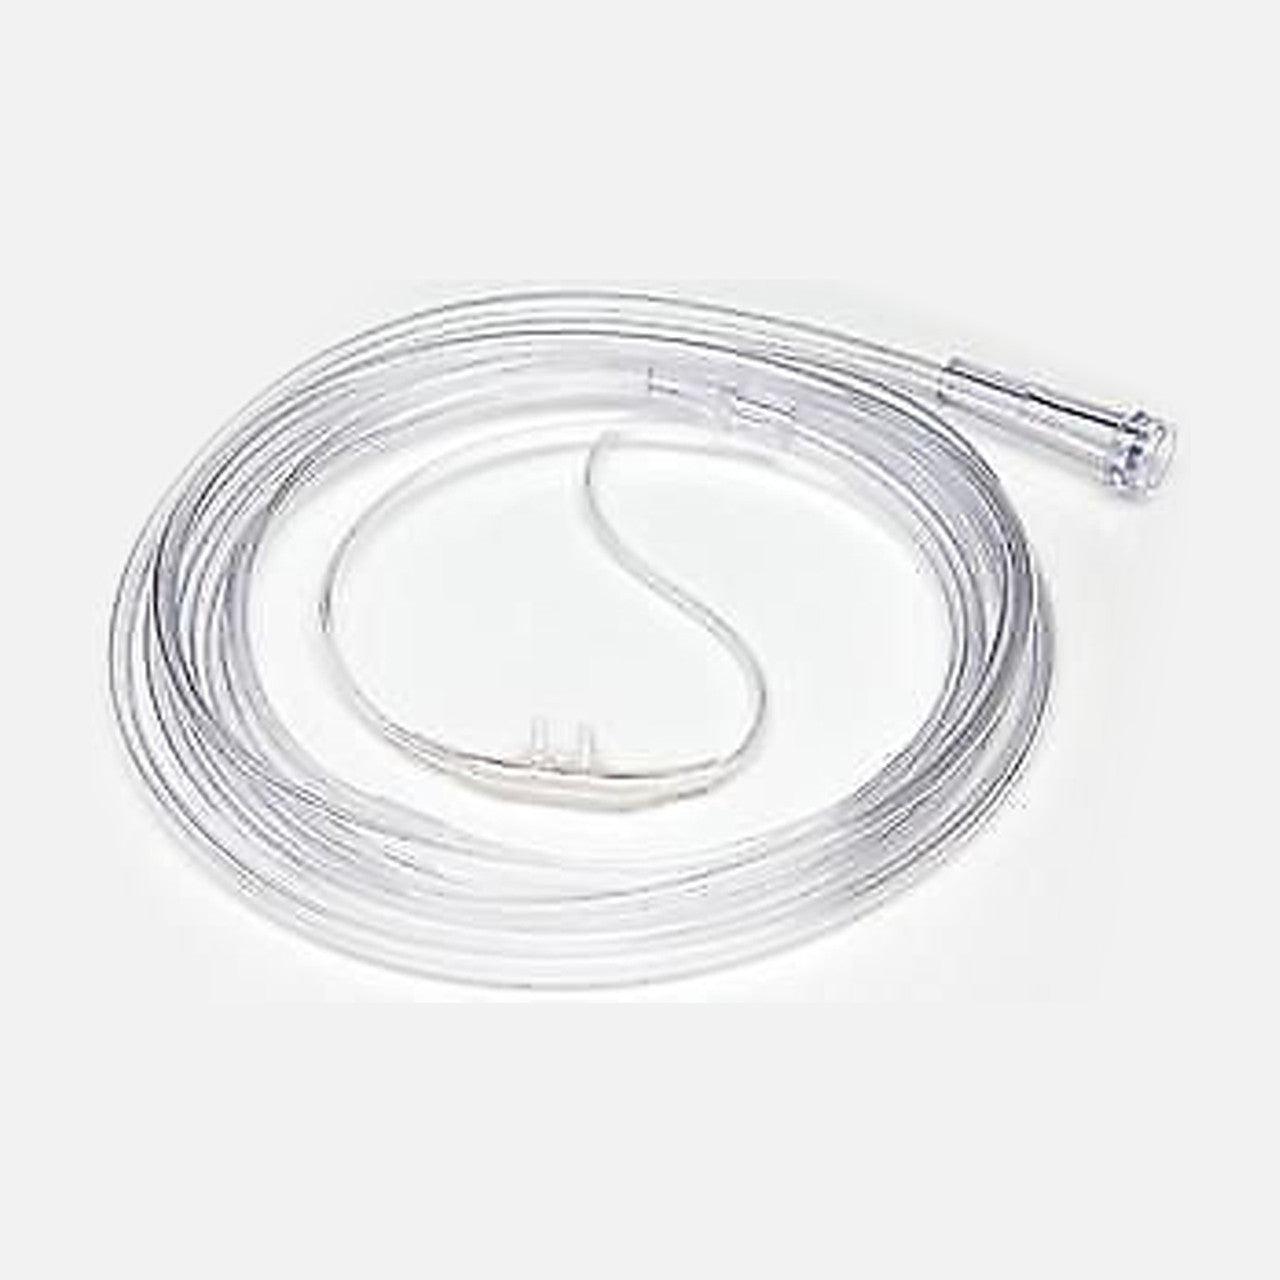 Pediatric Cannula With Soft Tips 7' (2.1m) supply tube